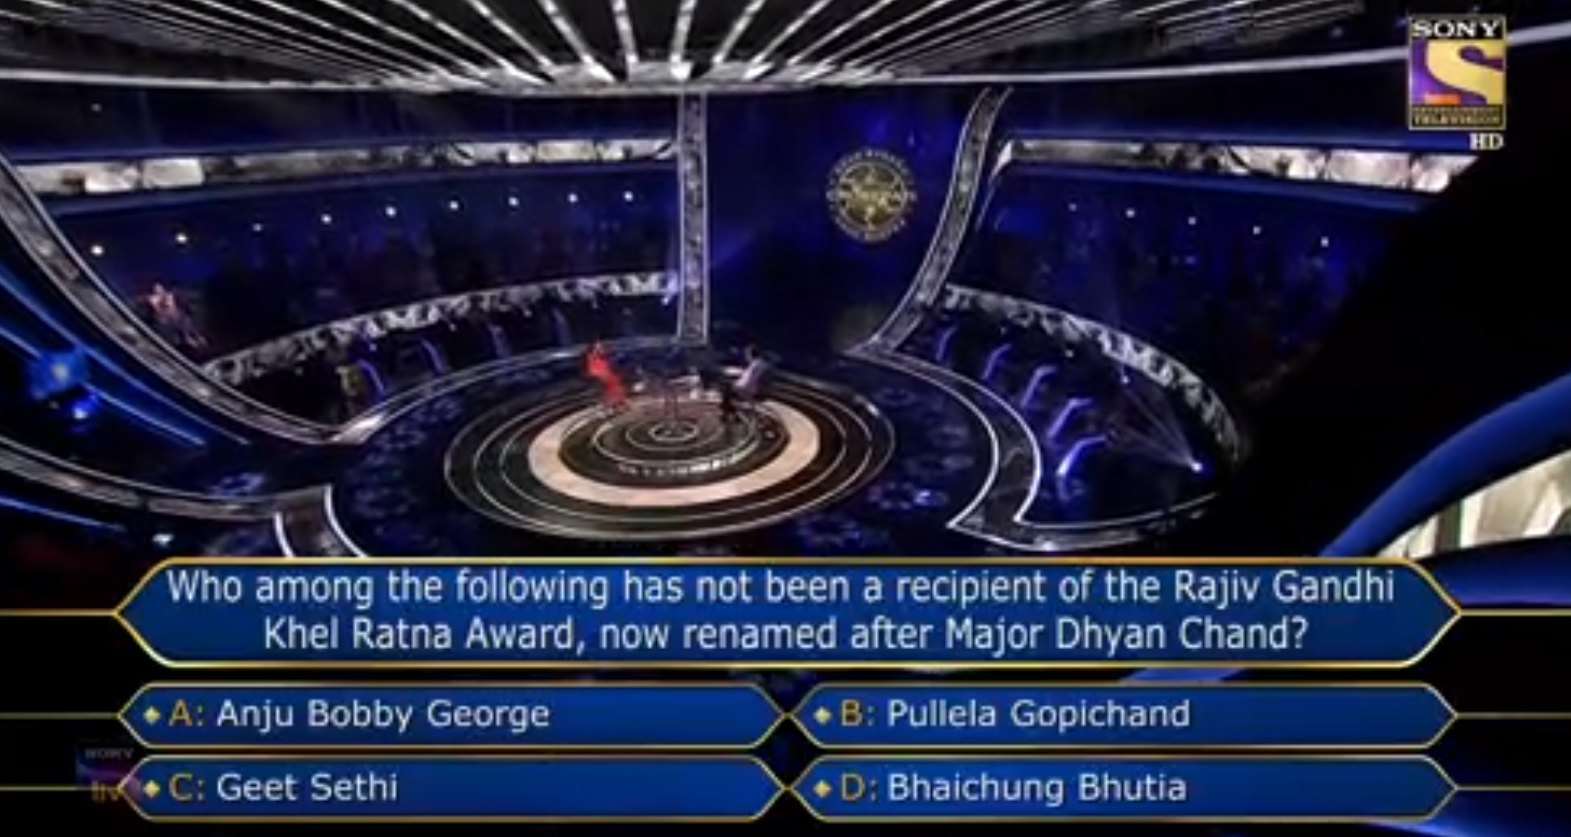 Ques : Who among the following has not been a recipient of the Rajiv Gandhi Khel Ratna Award, now renamed after Major Dhyan chand?